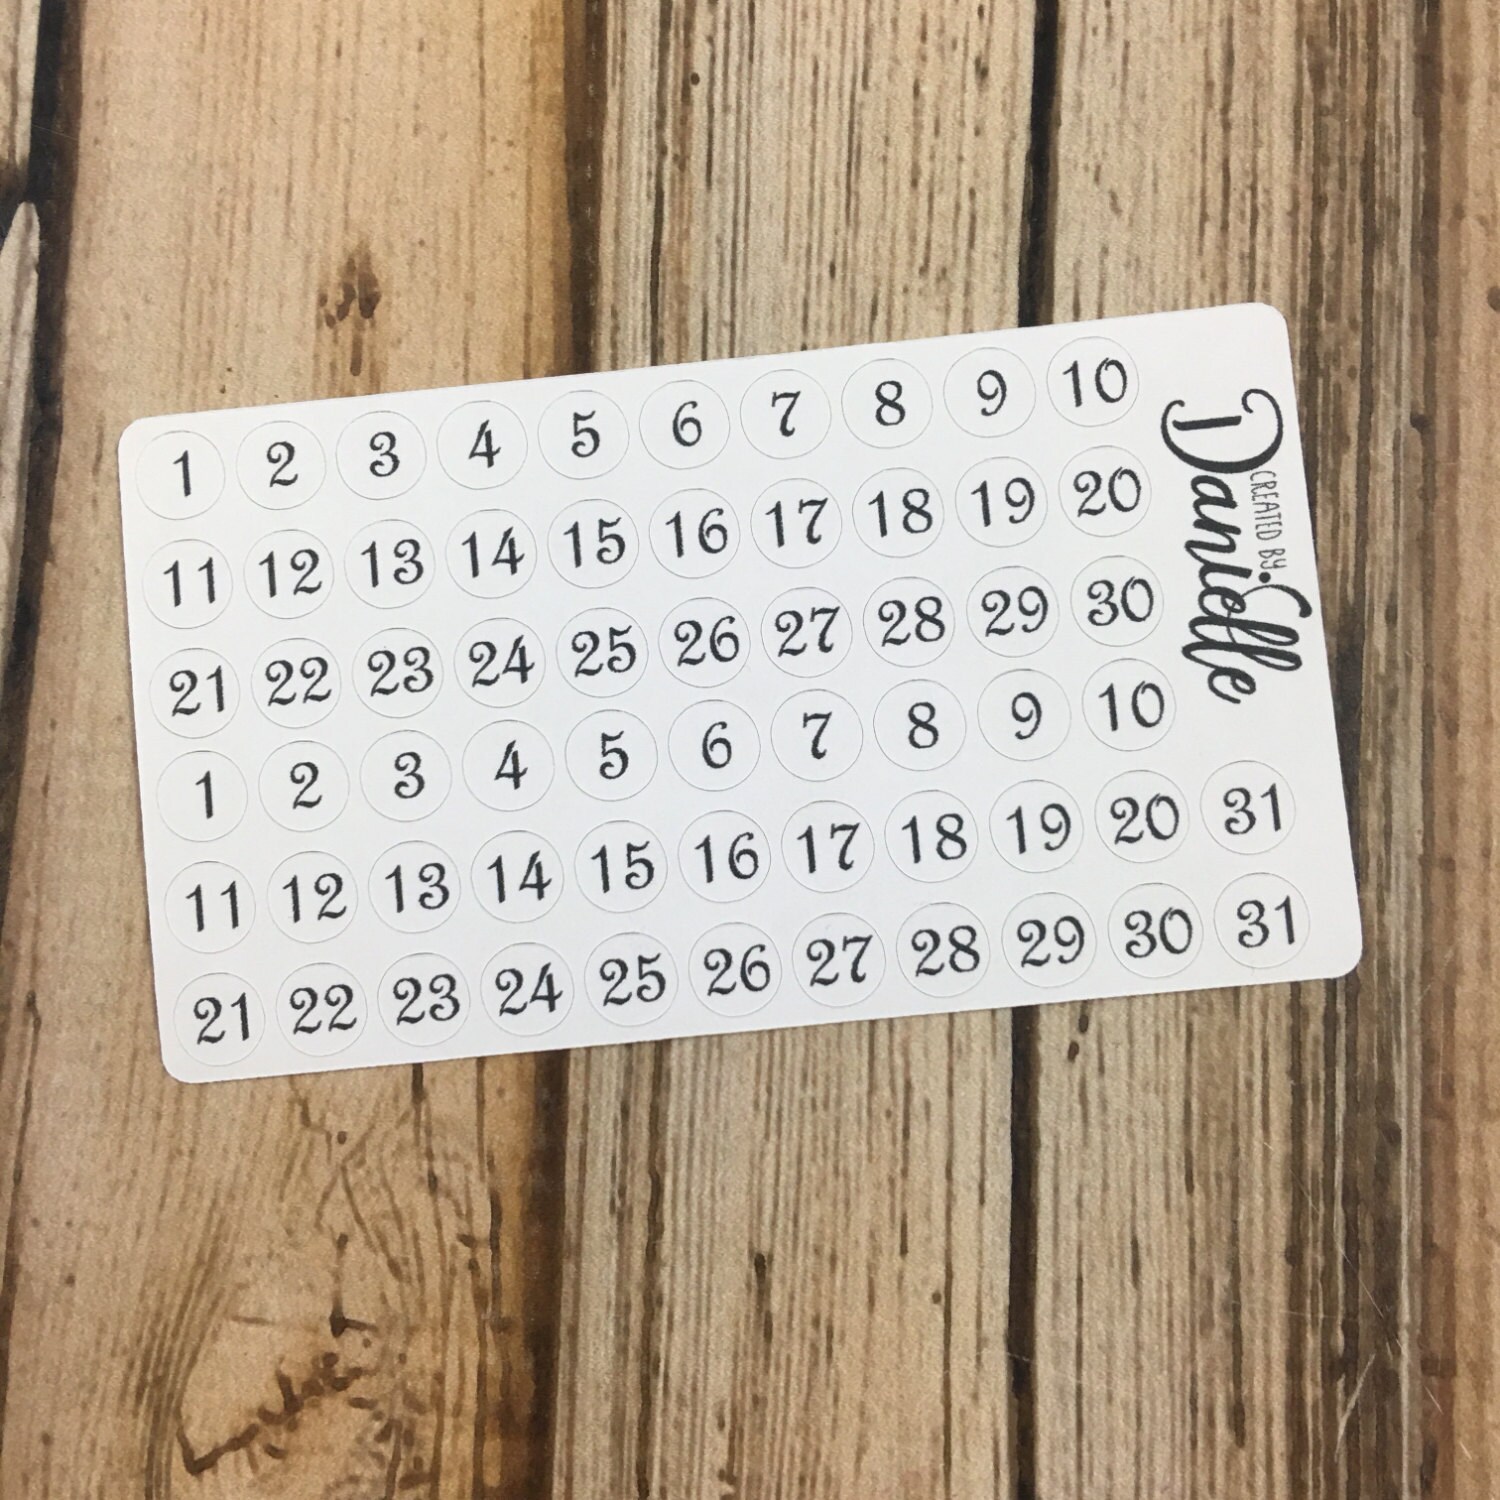 Number Stickers for Date in Undated Planner, Calendar, Journal or Notebook,  Functional Number Dot Stickers, Set of 62 Black 